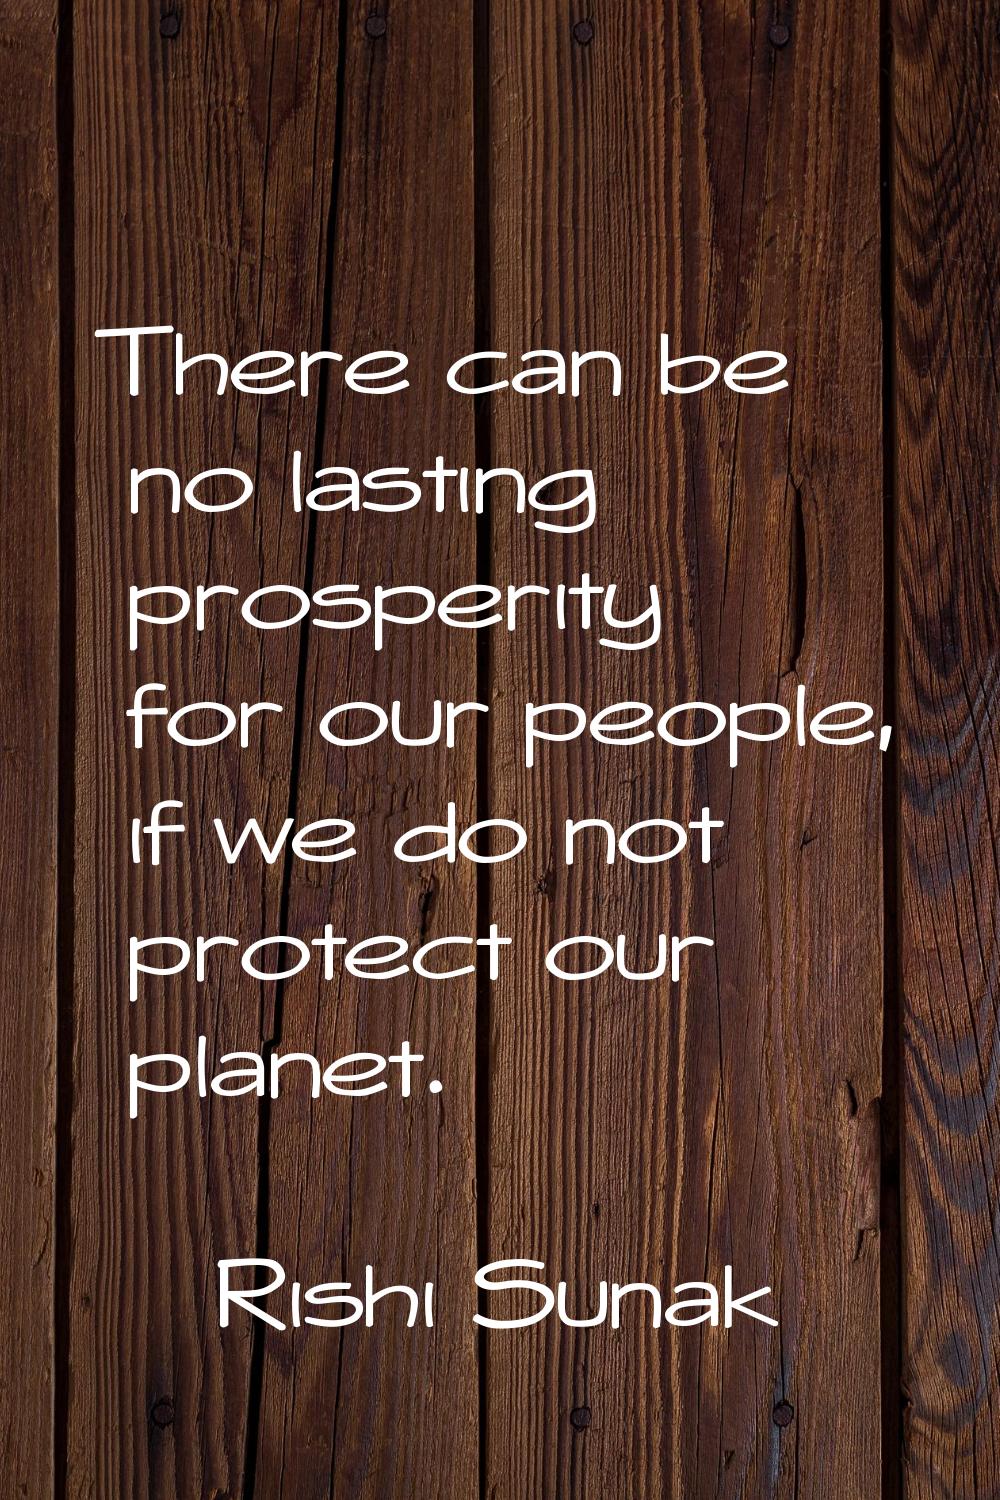 There can be no lasting prosperity for our people, if we do not protect our planet.